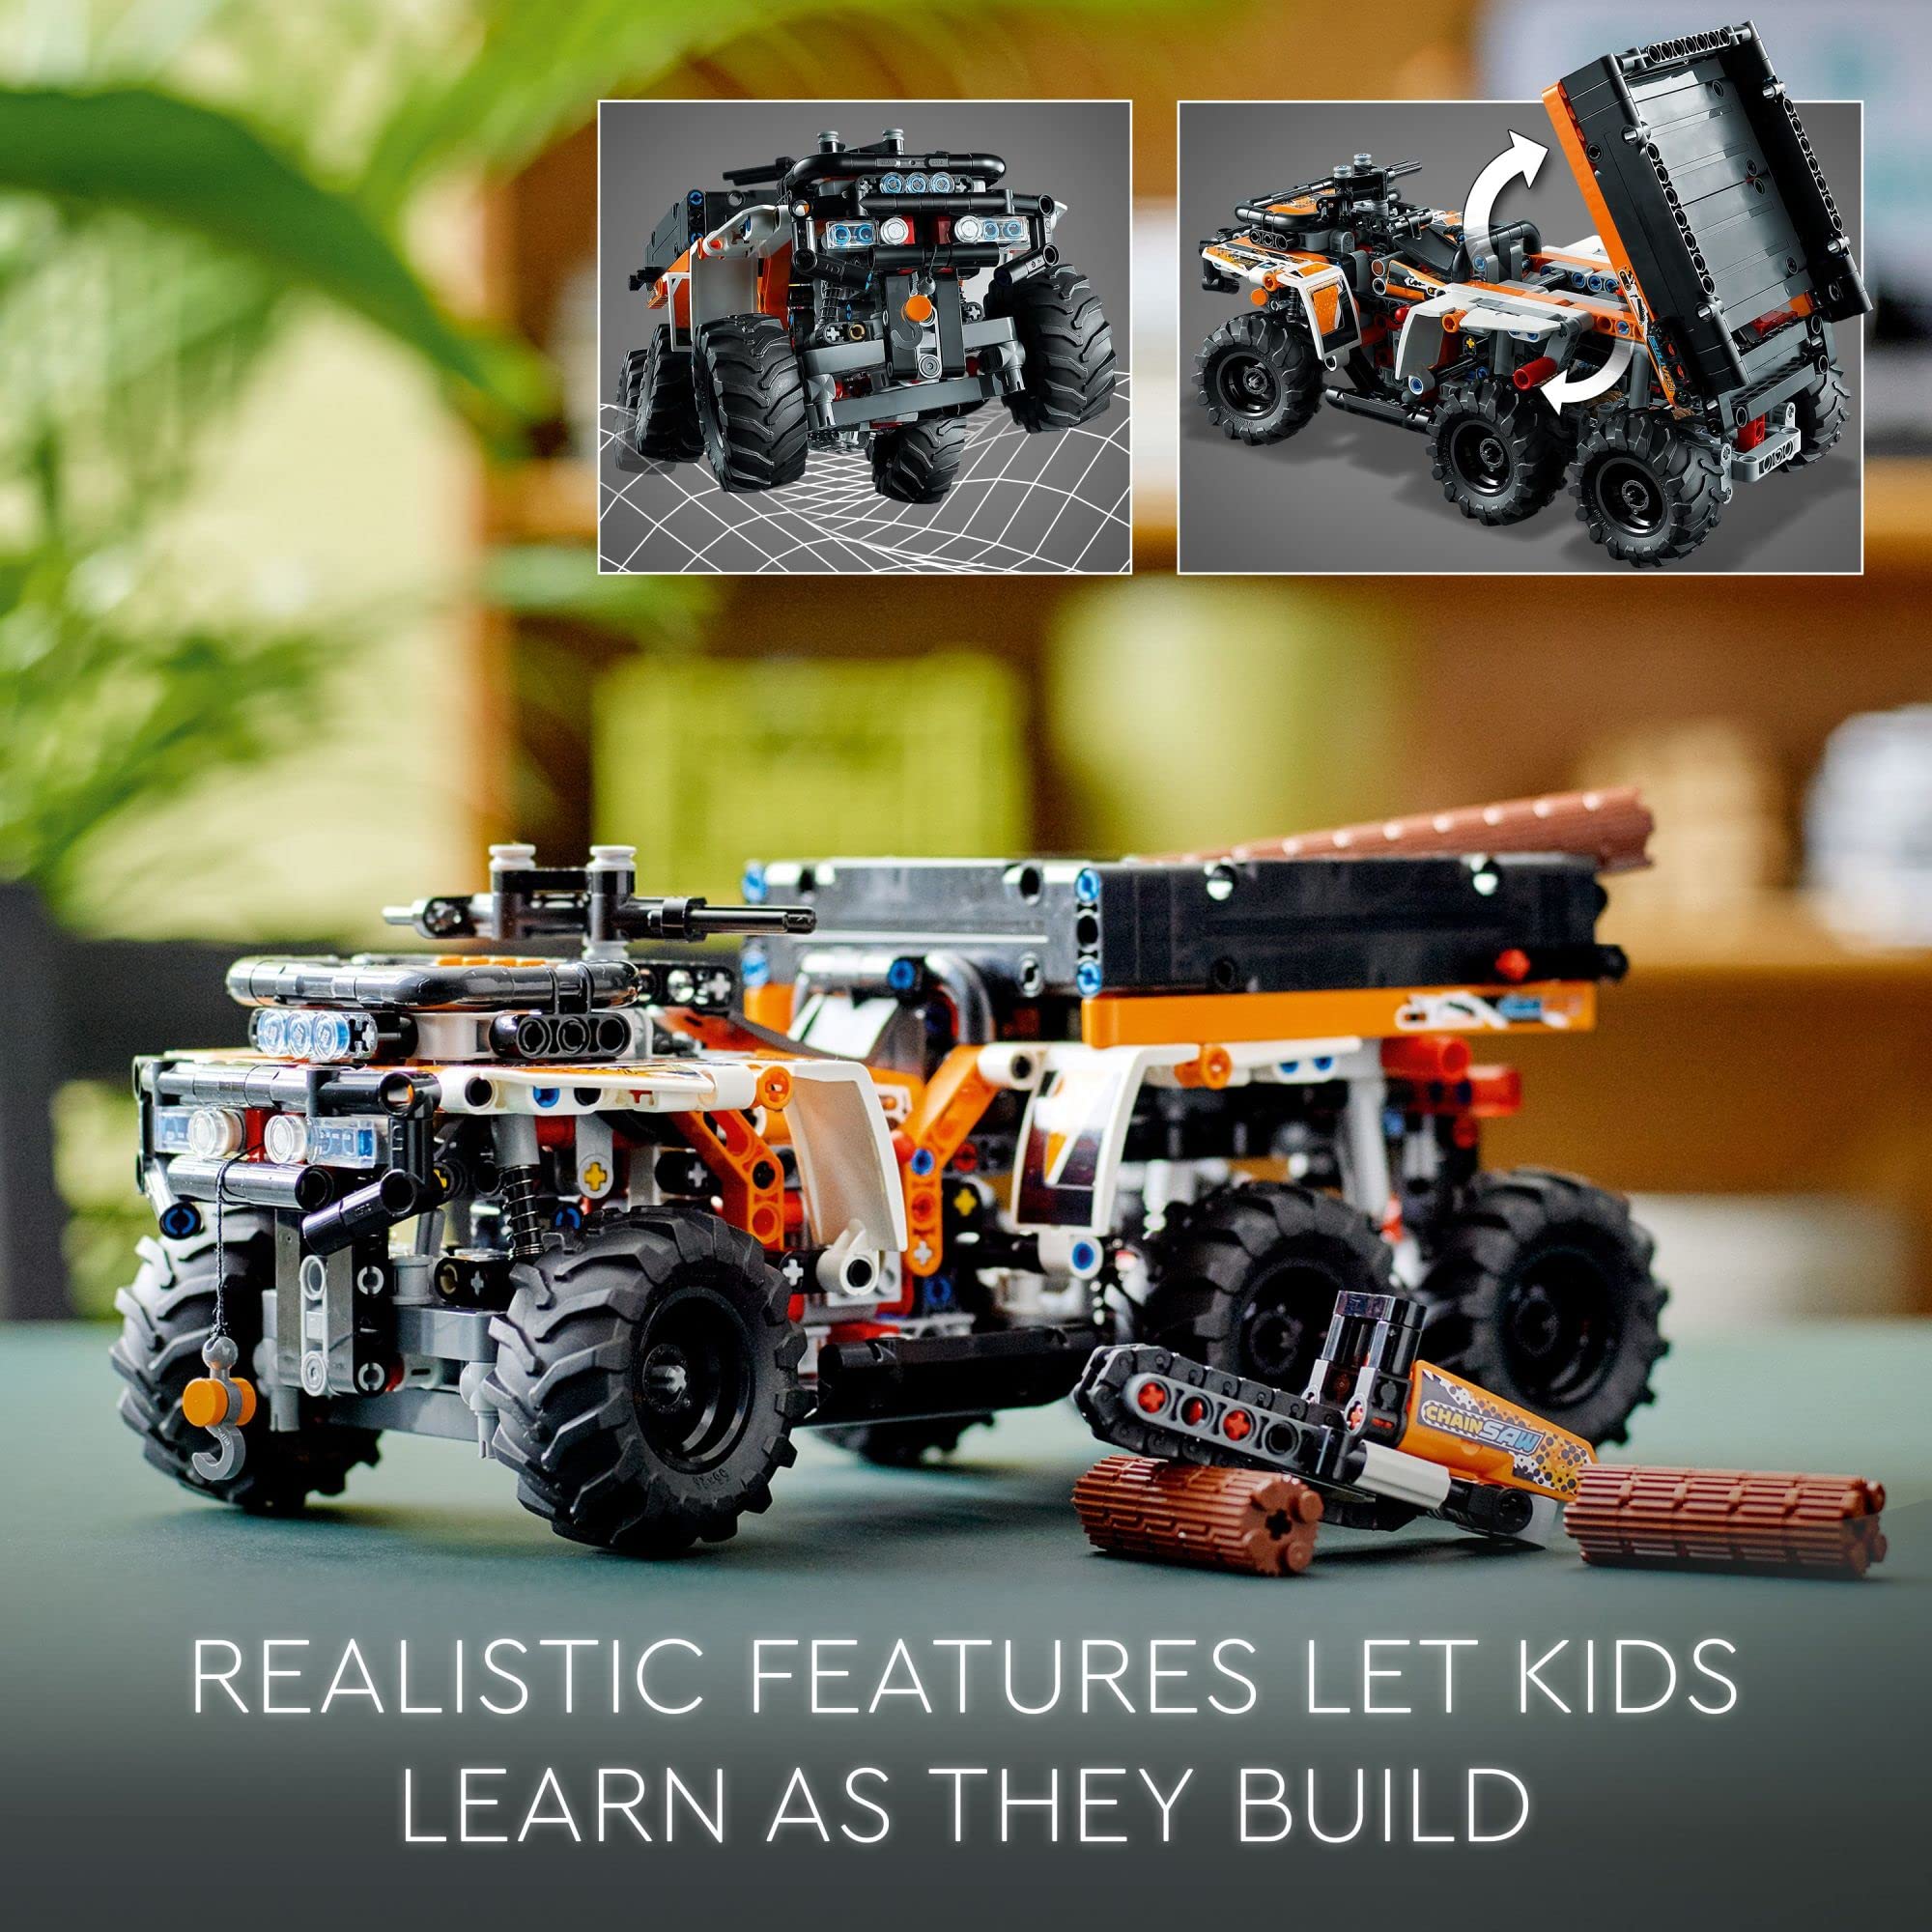 LEGO Technic All-Terrain Vehicle 42139, 6-Wheeled Off Roader Model Truck Toy, ATV Construction Set, Birthday Gift Idea for Kids, Boys and Girls